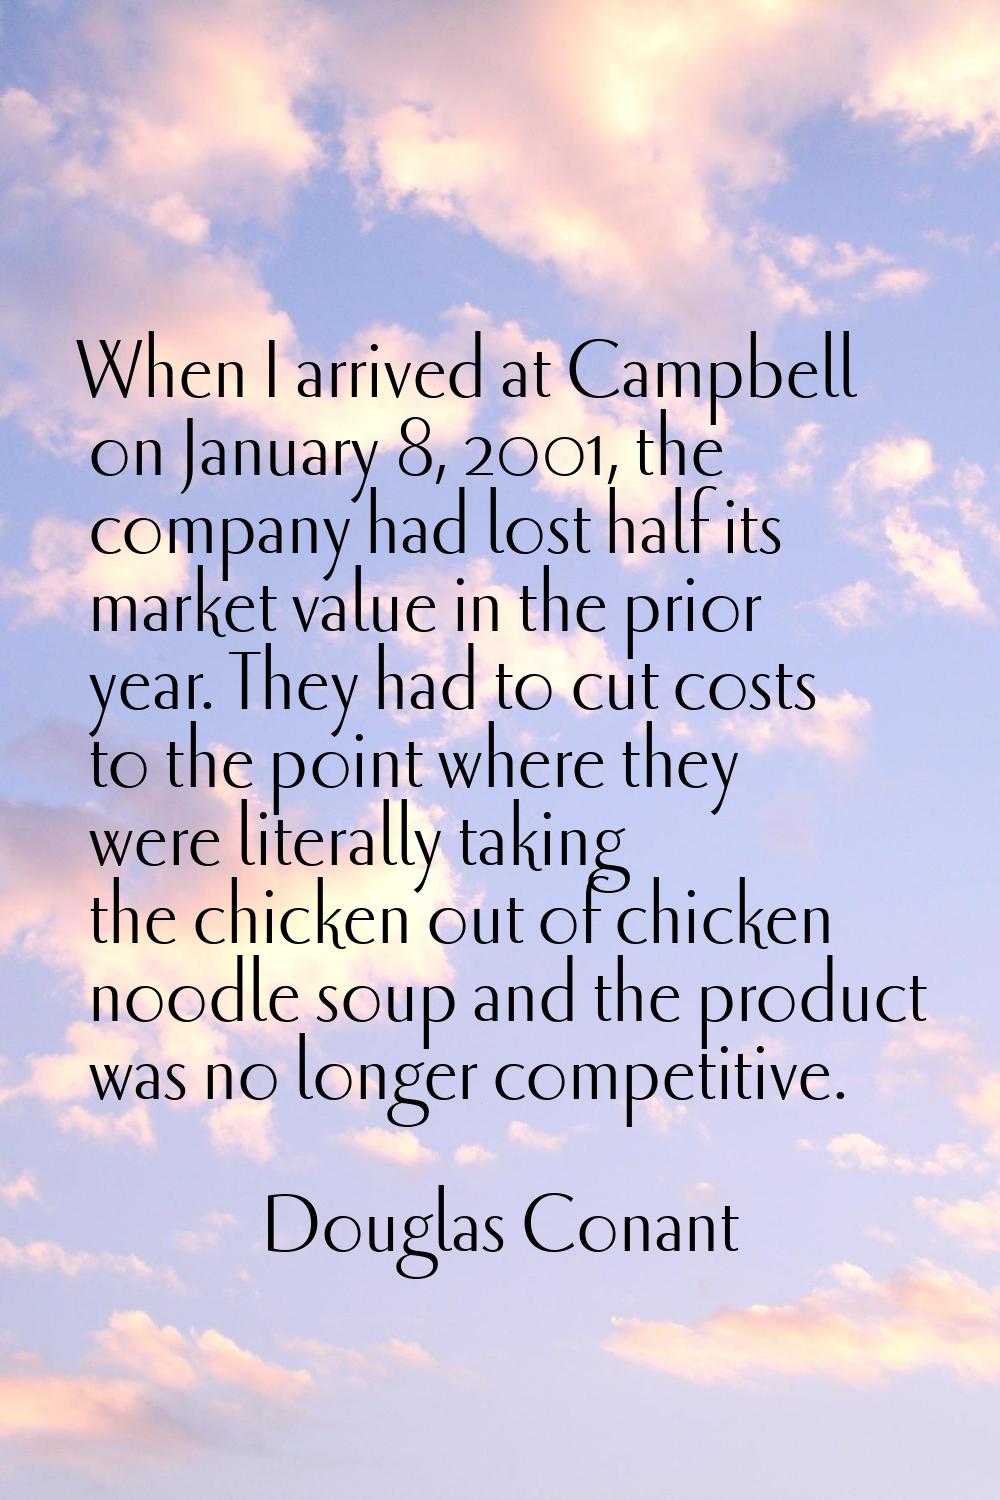 When I arrived at Campbell on January 8, 2001, the company had lost half its market value in the pr